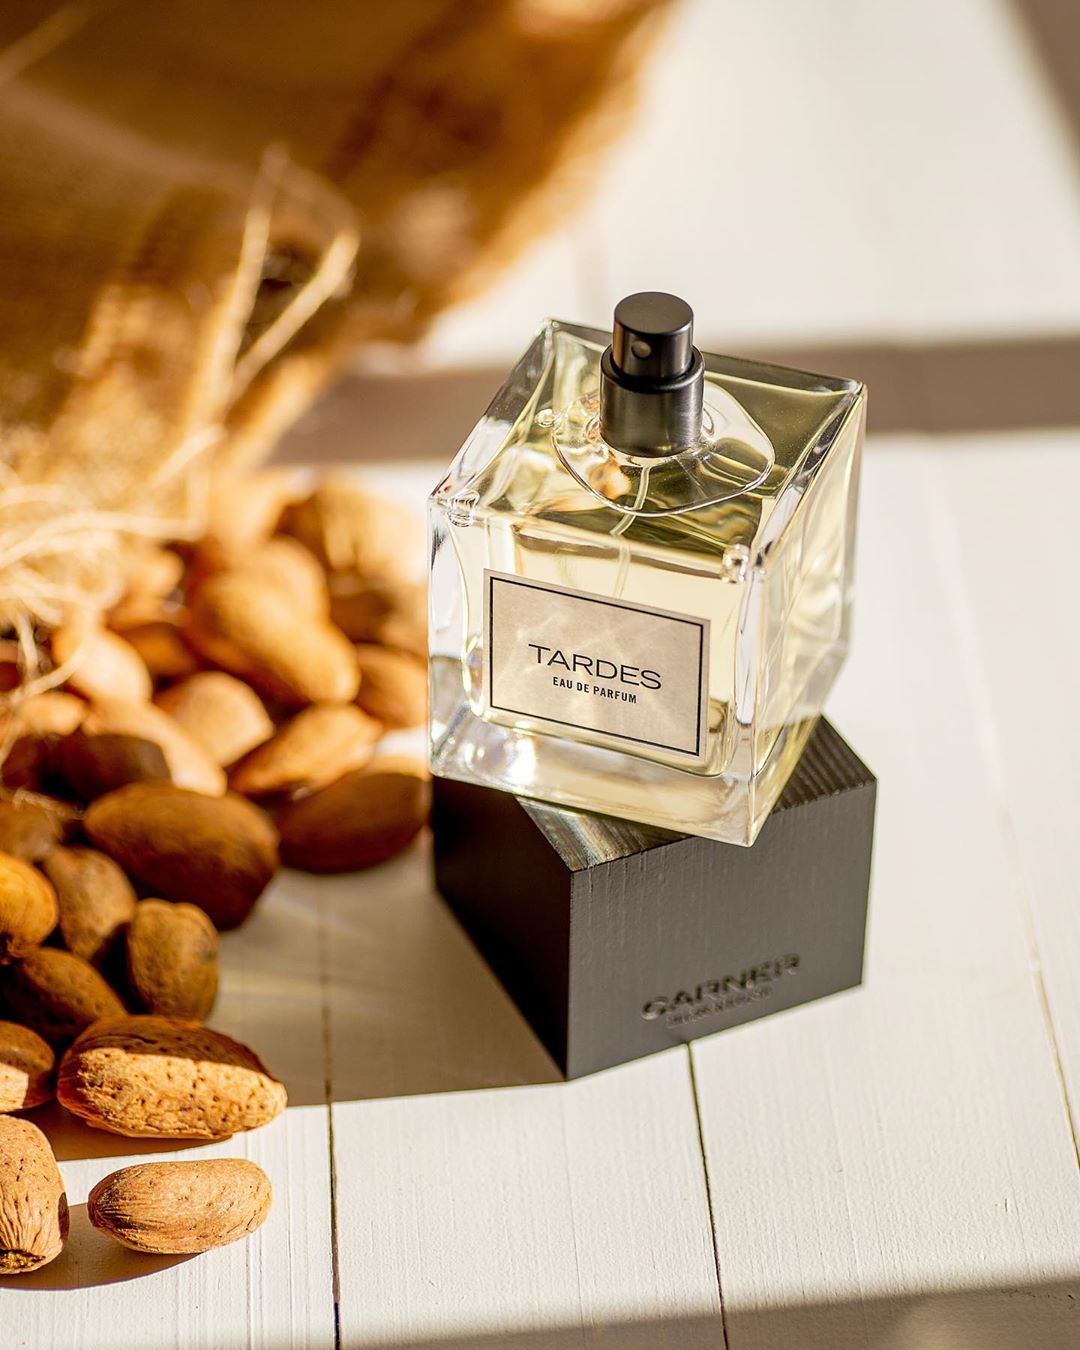 CARNER BARCELONA • Perfumes - TARDES  A peaceful stroll through the wheat fields and almond trees as the light of a summer day wanes and the warmth of the air caresses your skin... Admiring the beauty...